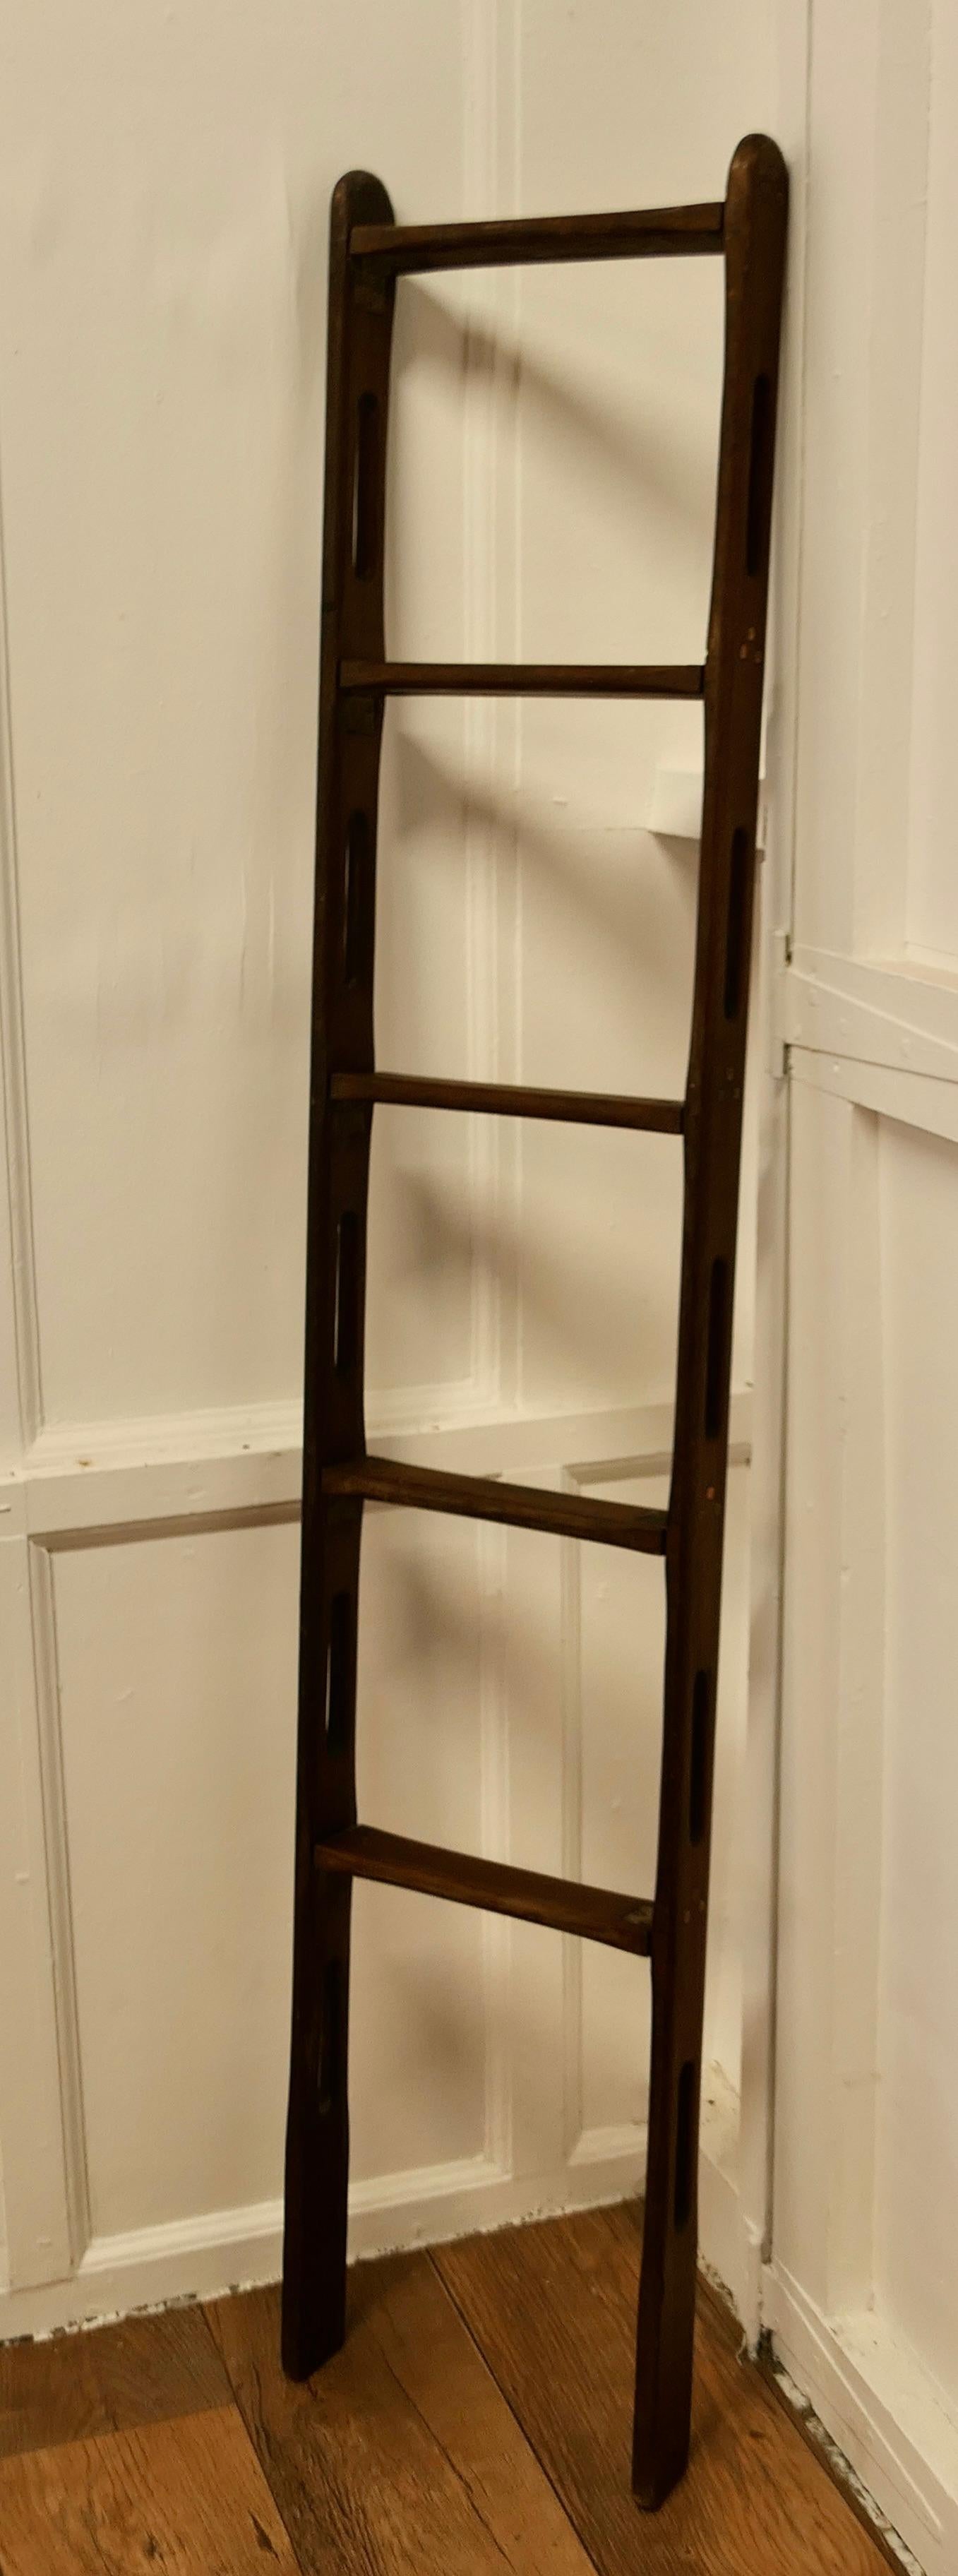 Vintage Folding Teak and Brass Yacht Ladder

A superb stowable piece in excellent antique condition
In quality thick solid teak with copper rivets and brass hinges
Solidly made and robust with 5 treads
When opened out the ladder is 66” tall, 13”